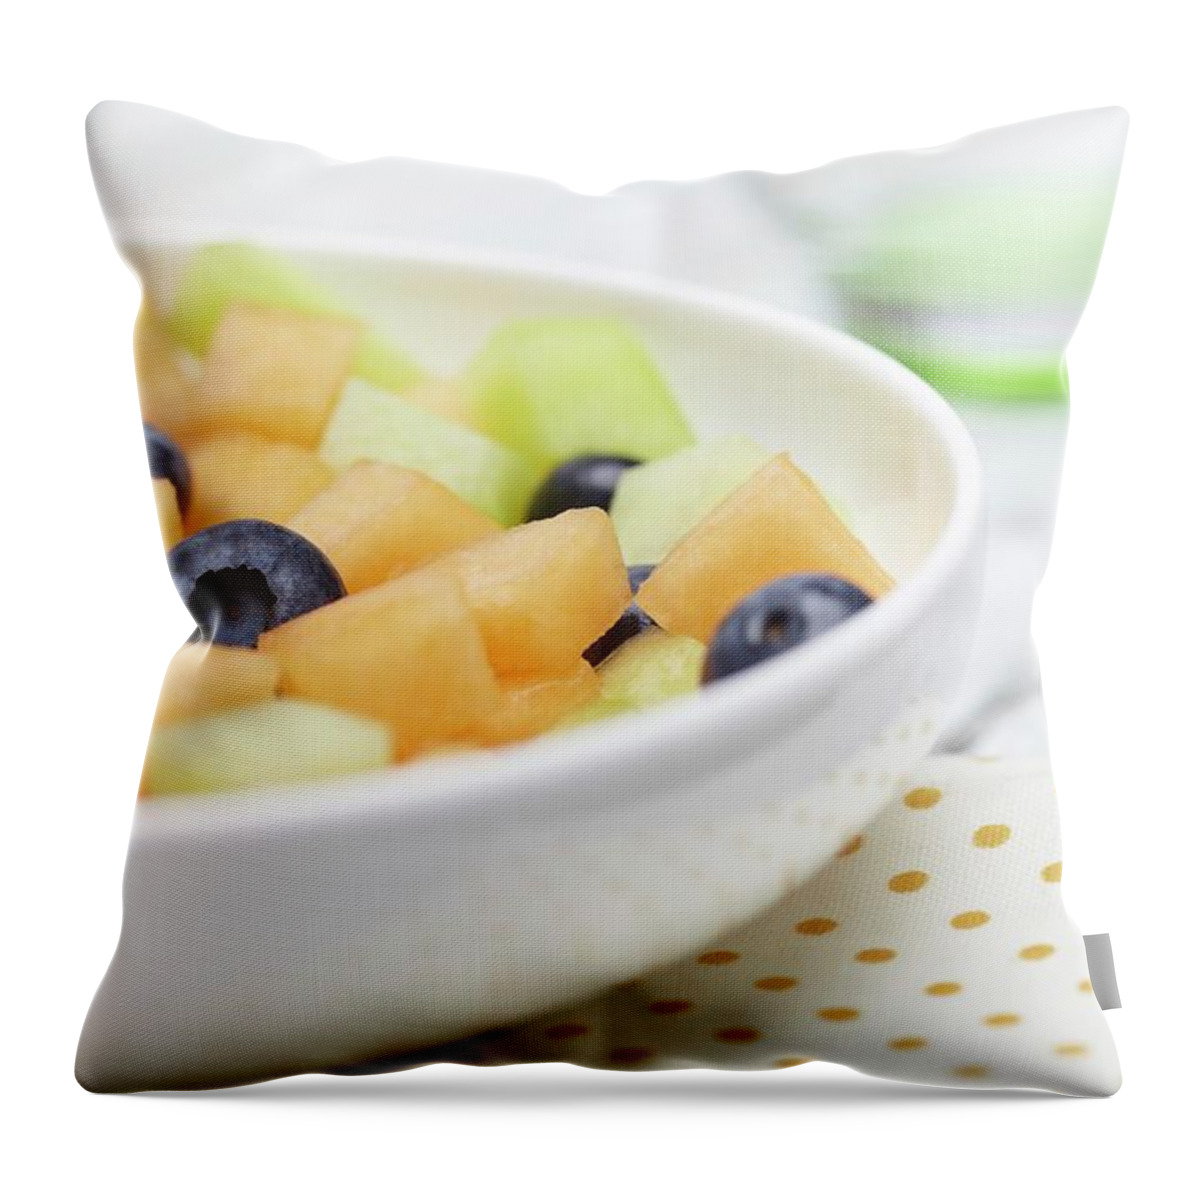 Ip_11146805 Throw Pillow featuring the photograph Bowl Of Fruit Salad; Cantaloupe, Honeydew And Blueberries by James, Bruce